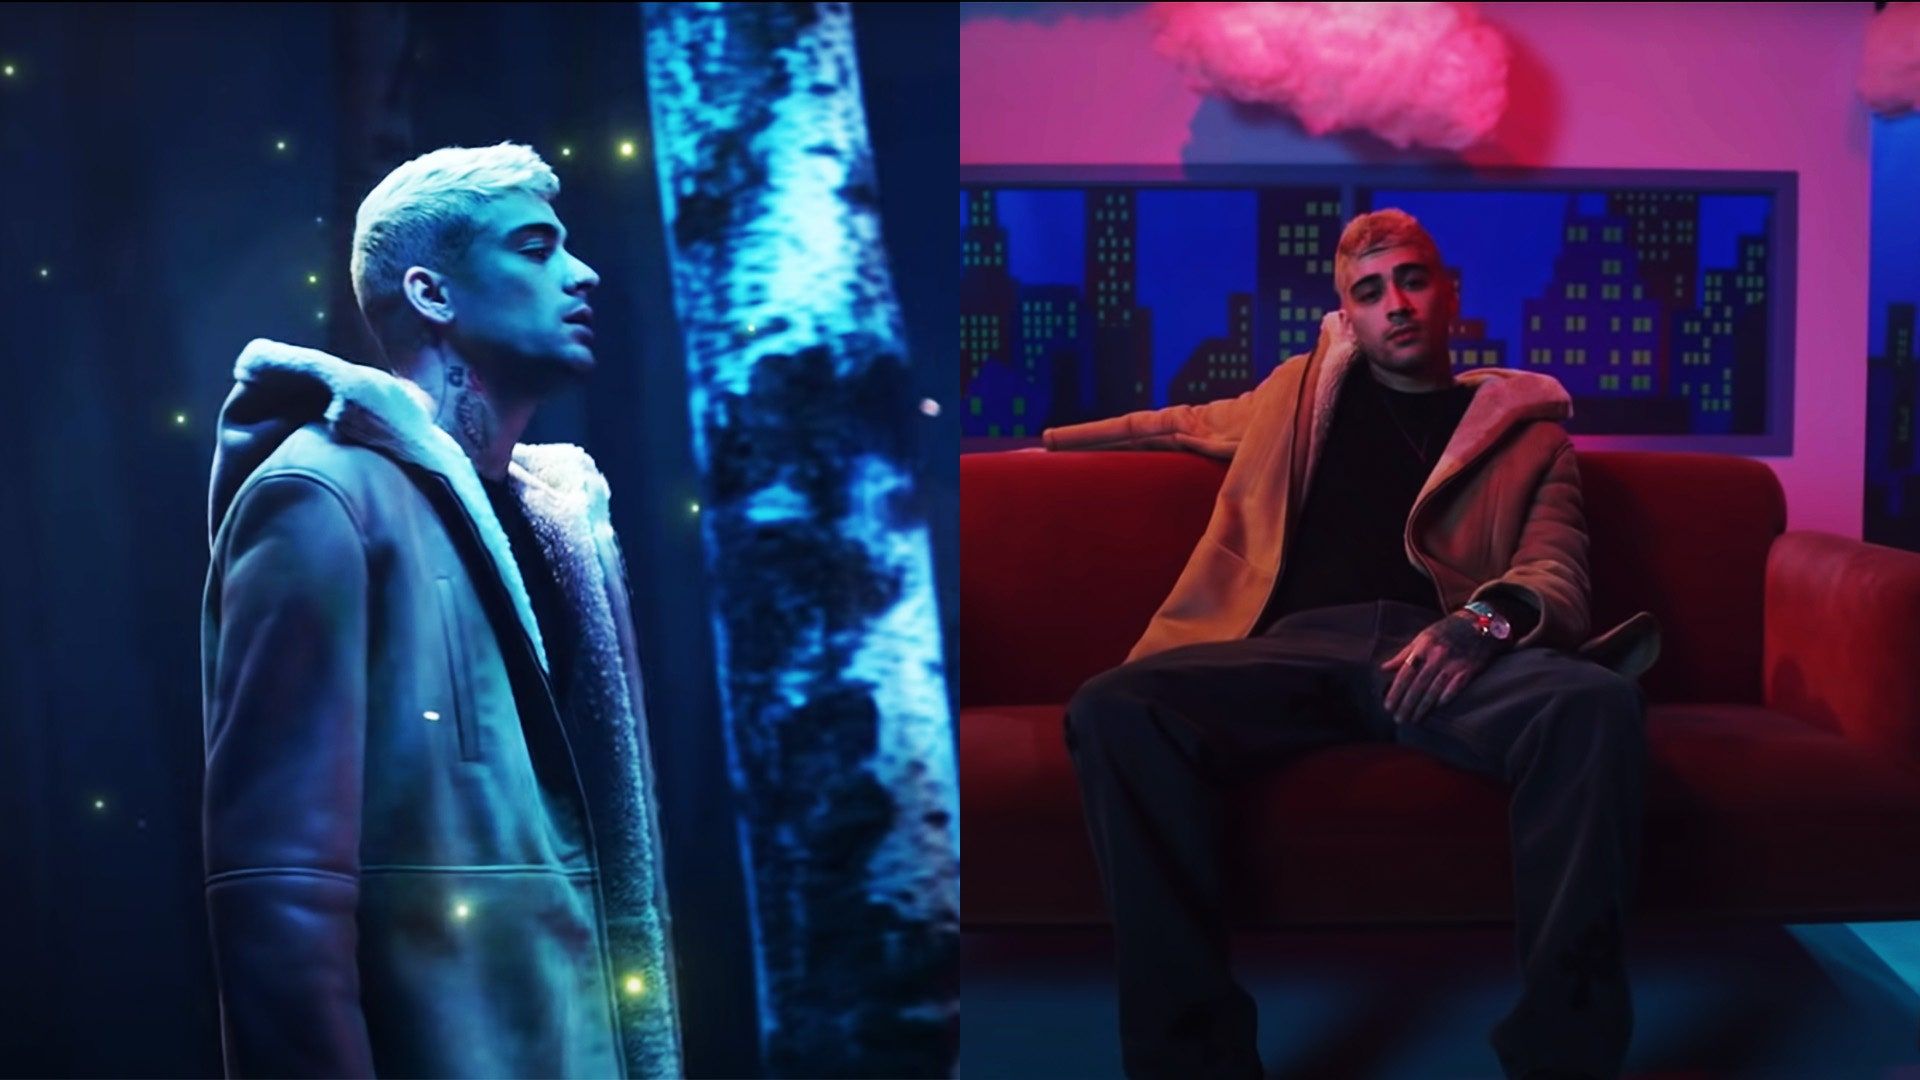 Zayn Malik's style in the Vibez video is perfect winter dressing